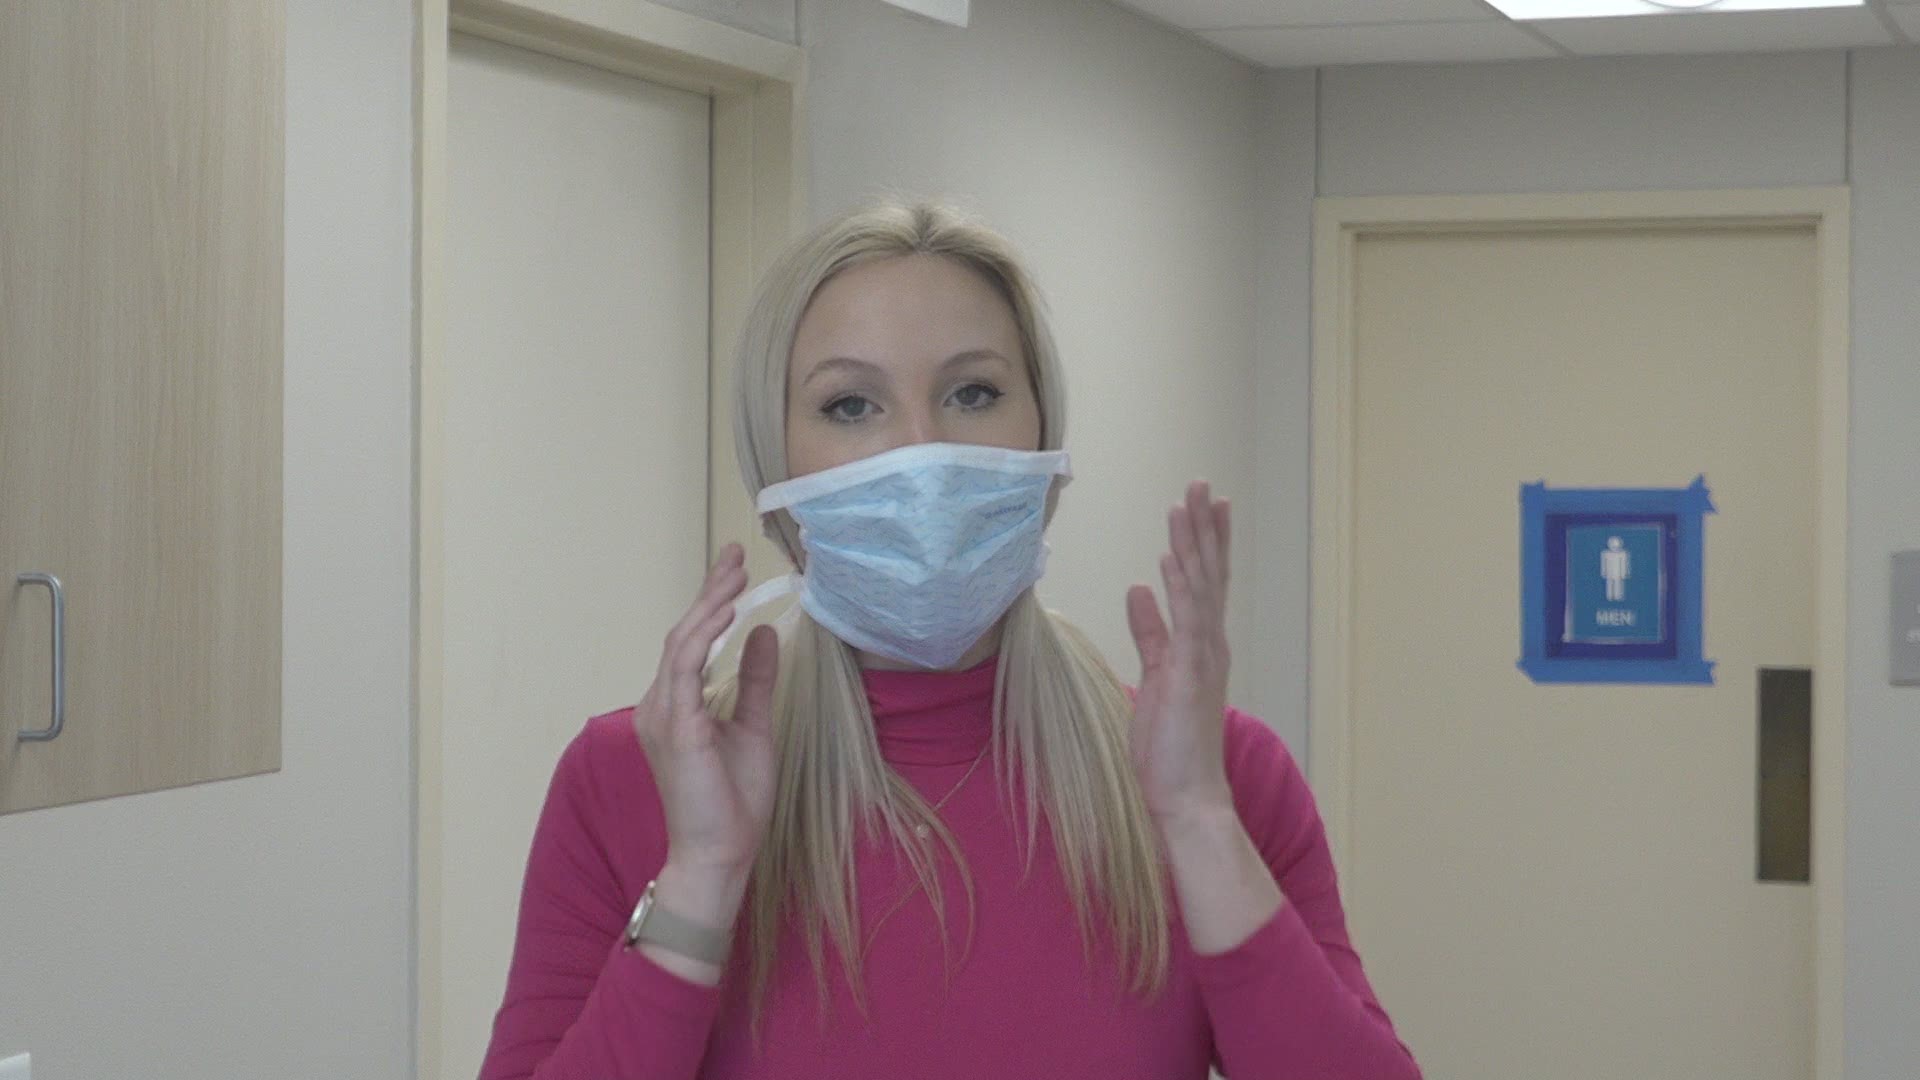 Shannon Medical's infection preventionist explains how, when and why to use (or not use) medical masks